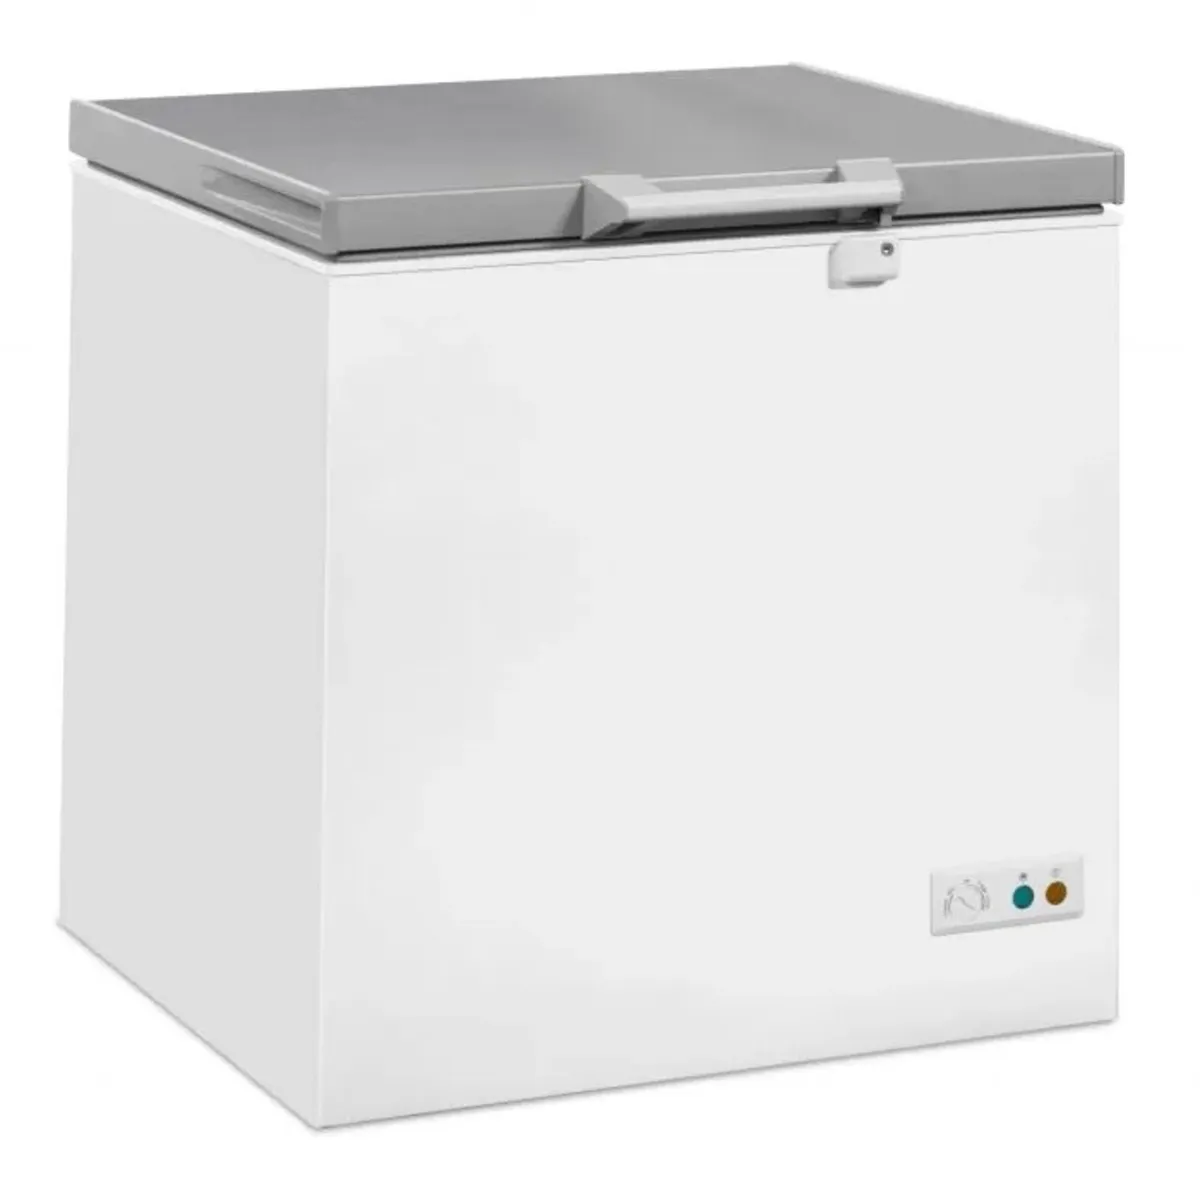 New commercial chest freezers